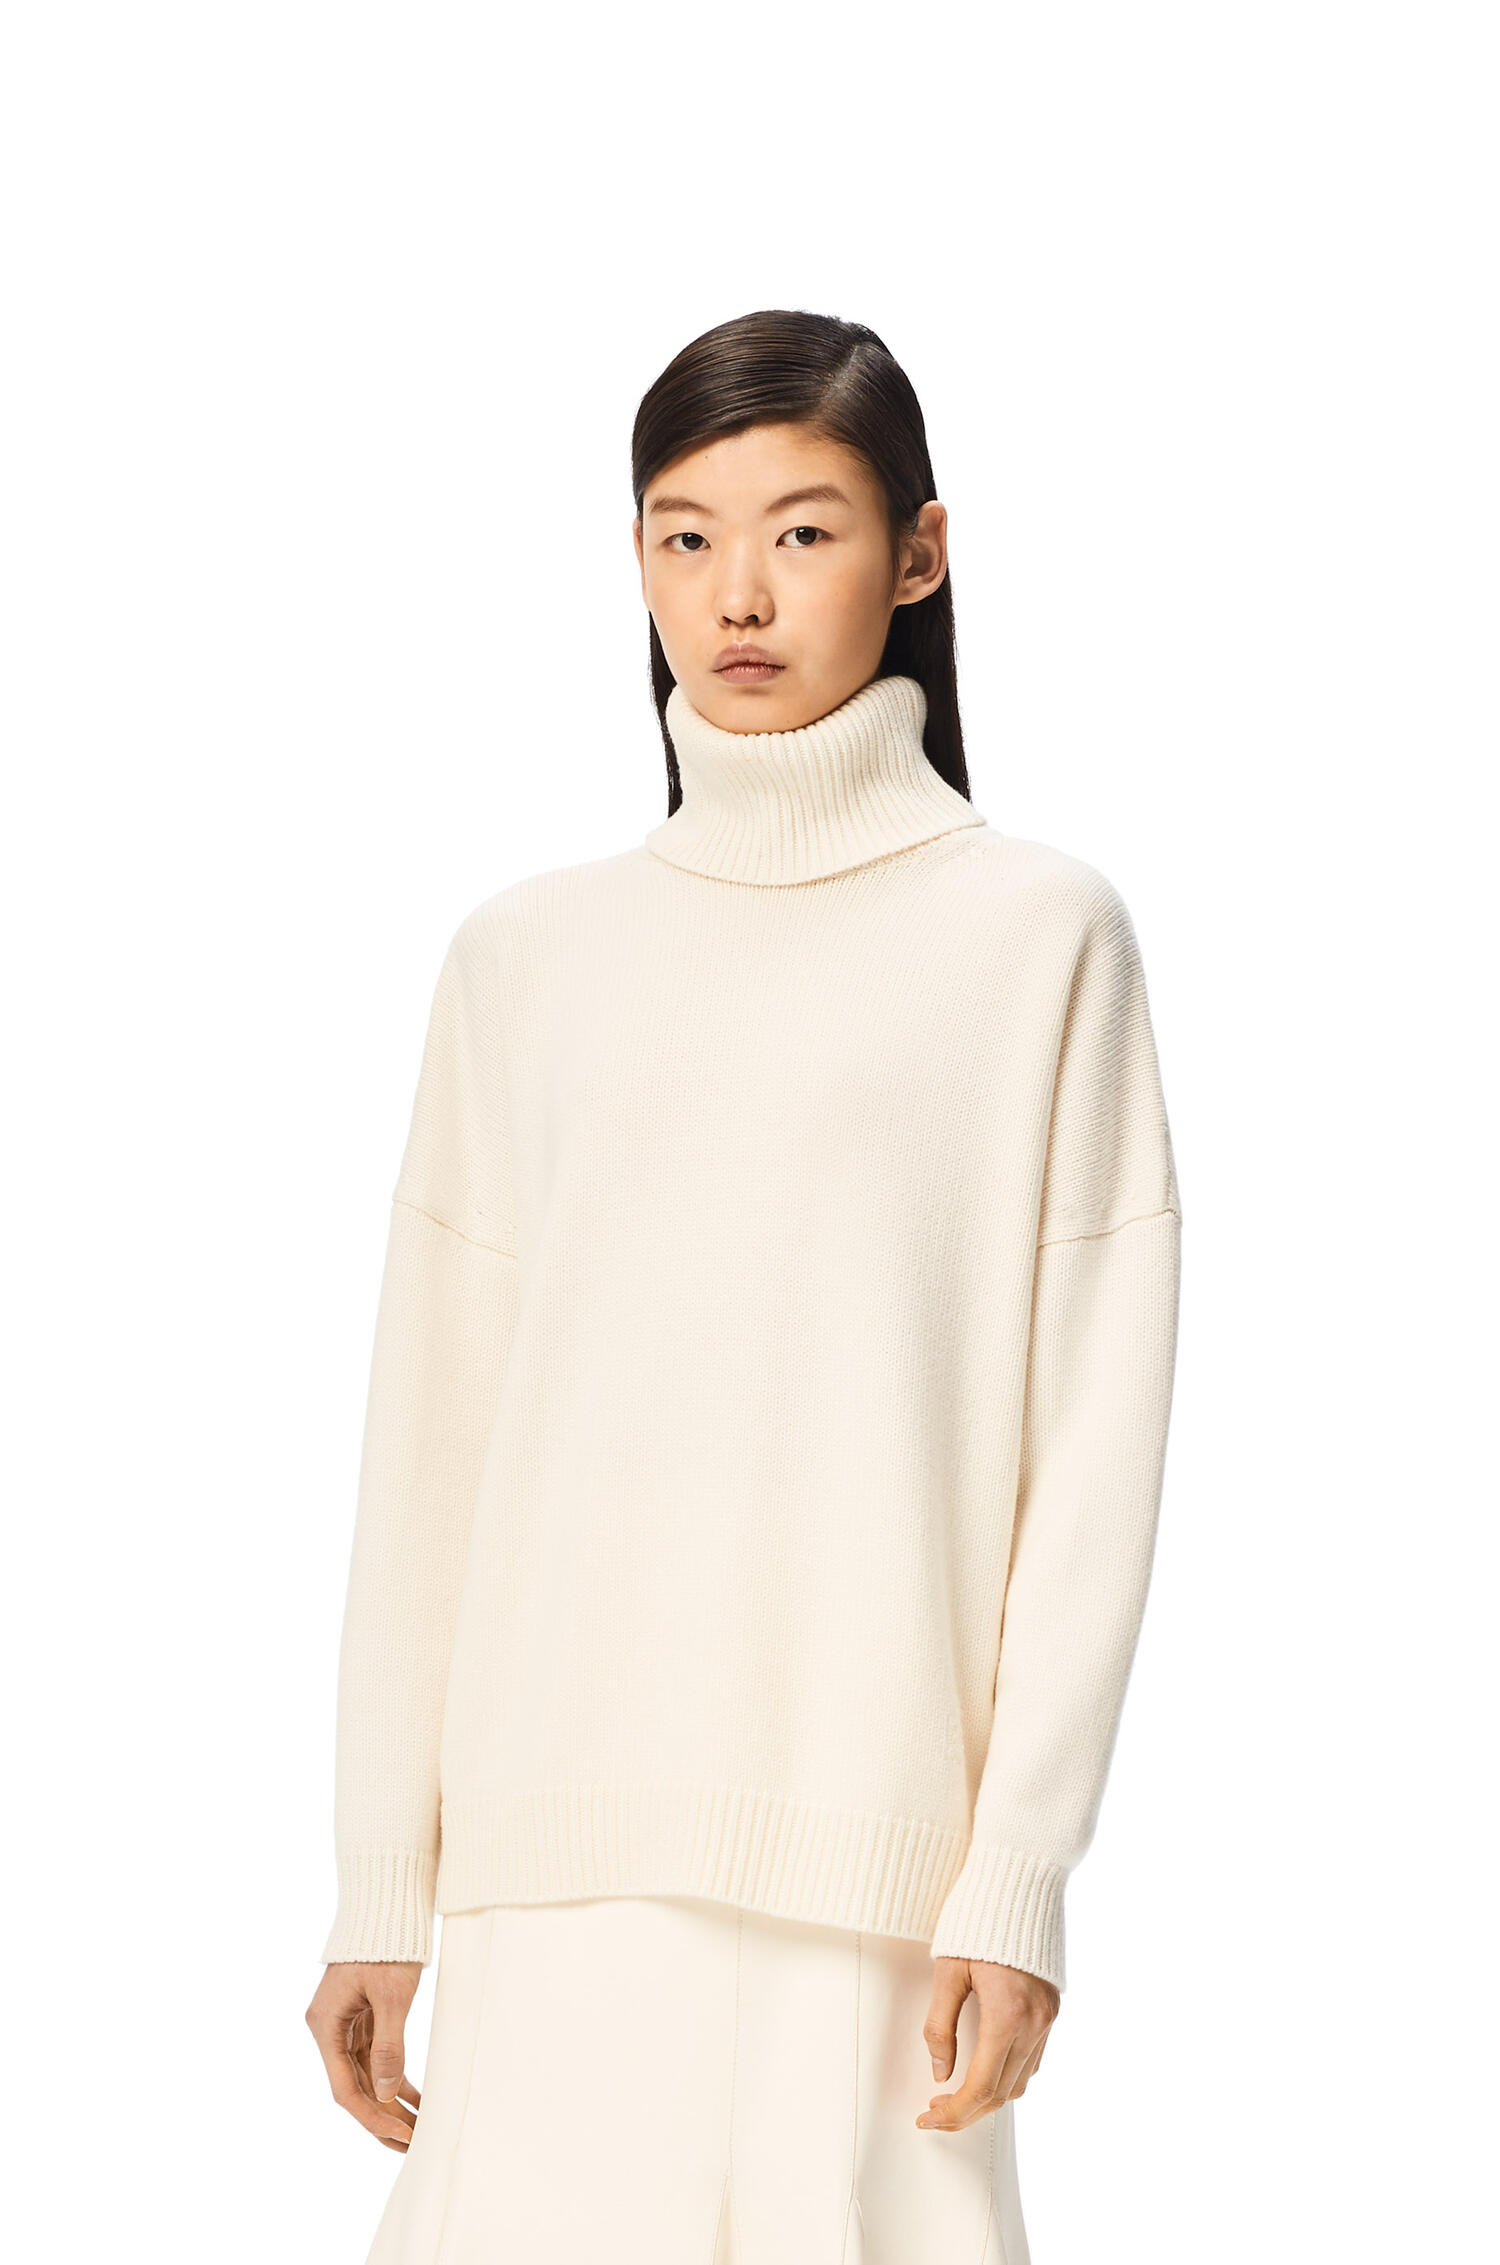 Anagram embroidered turtleneck sweater in cashmere Off-white - LOEWE